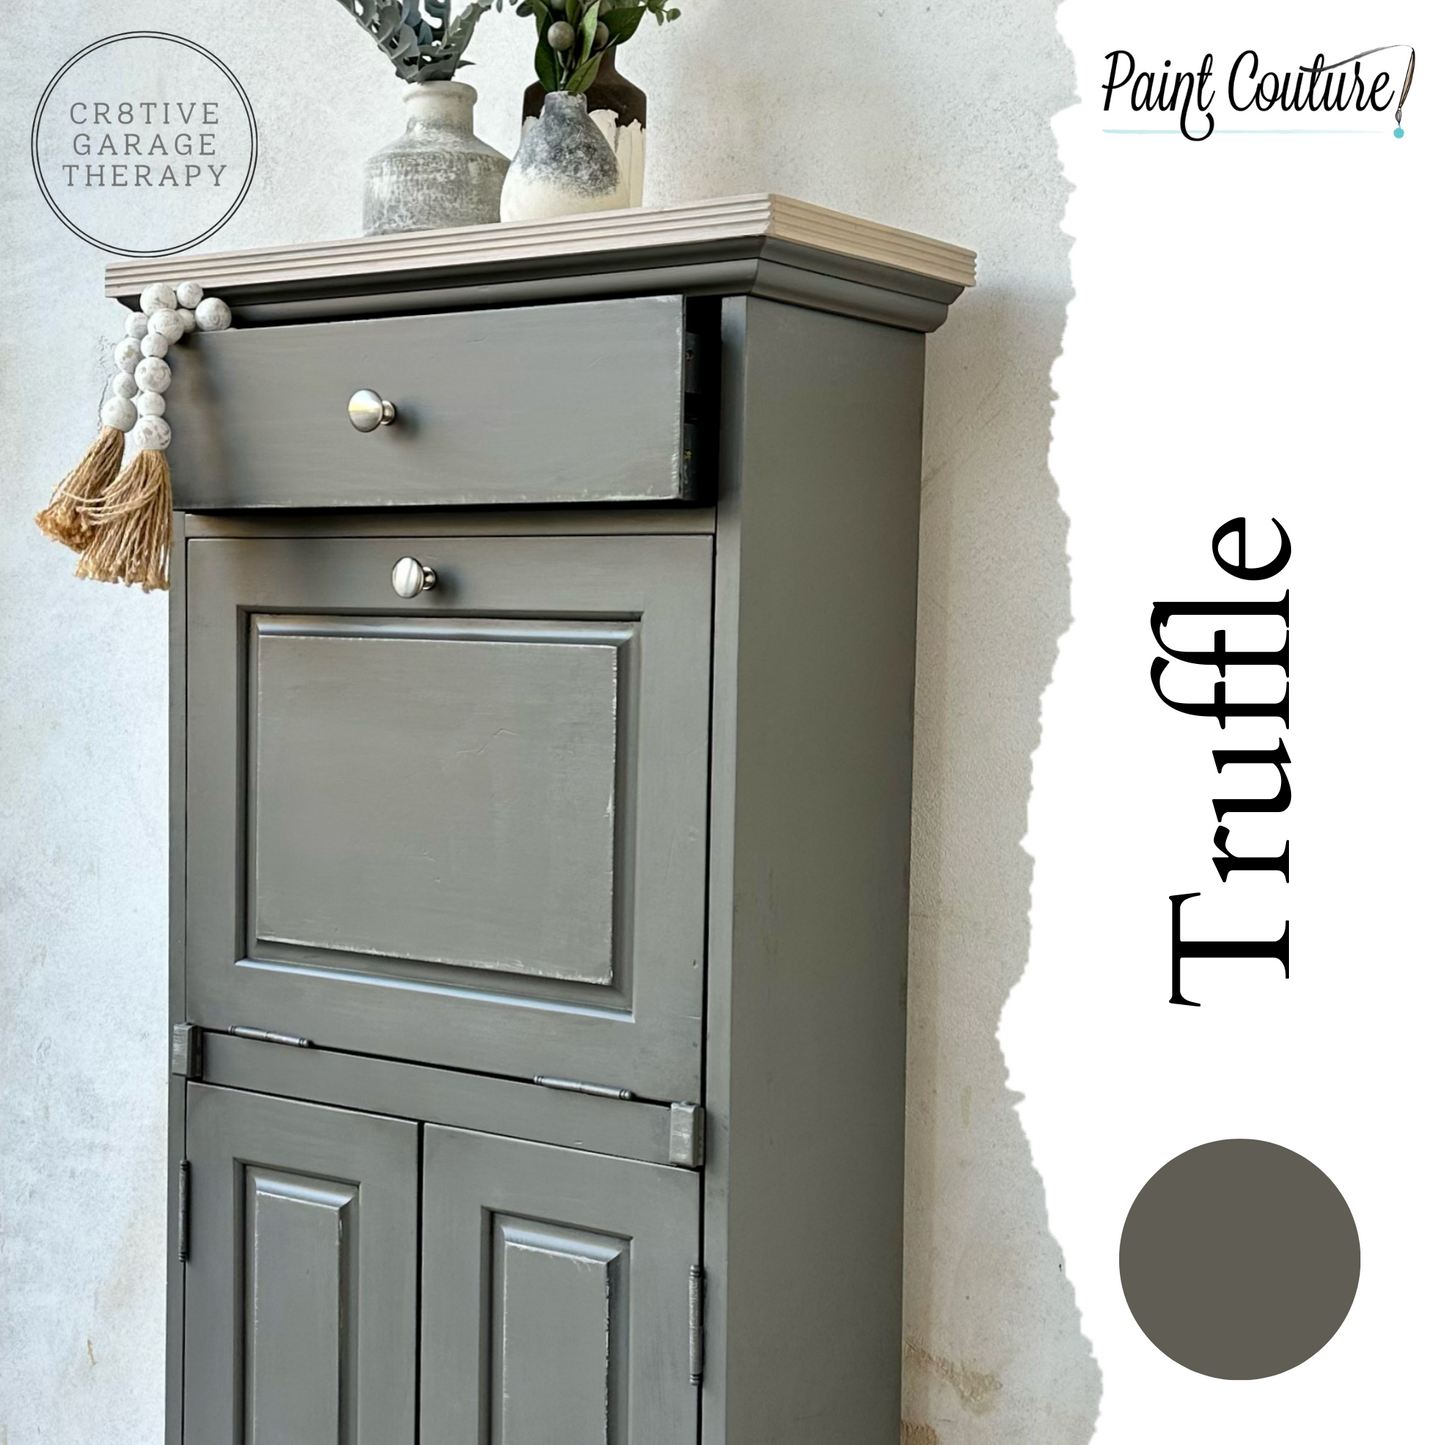 Paint Couture Truffle - Acrylic Mineral Paint with a Flat Finish!